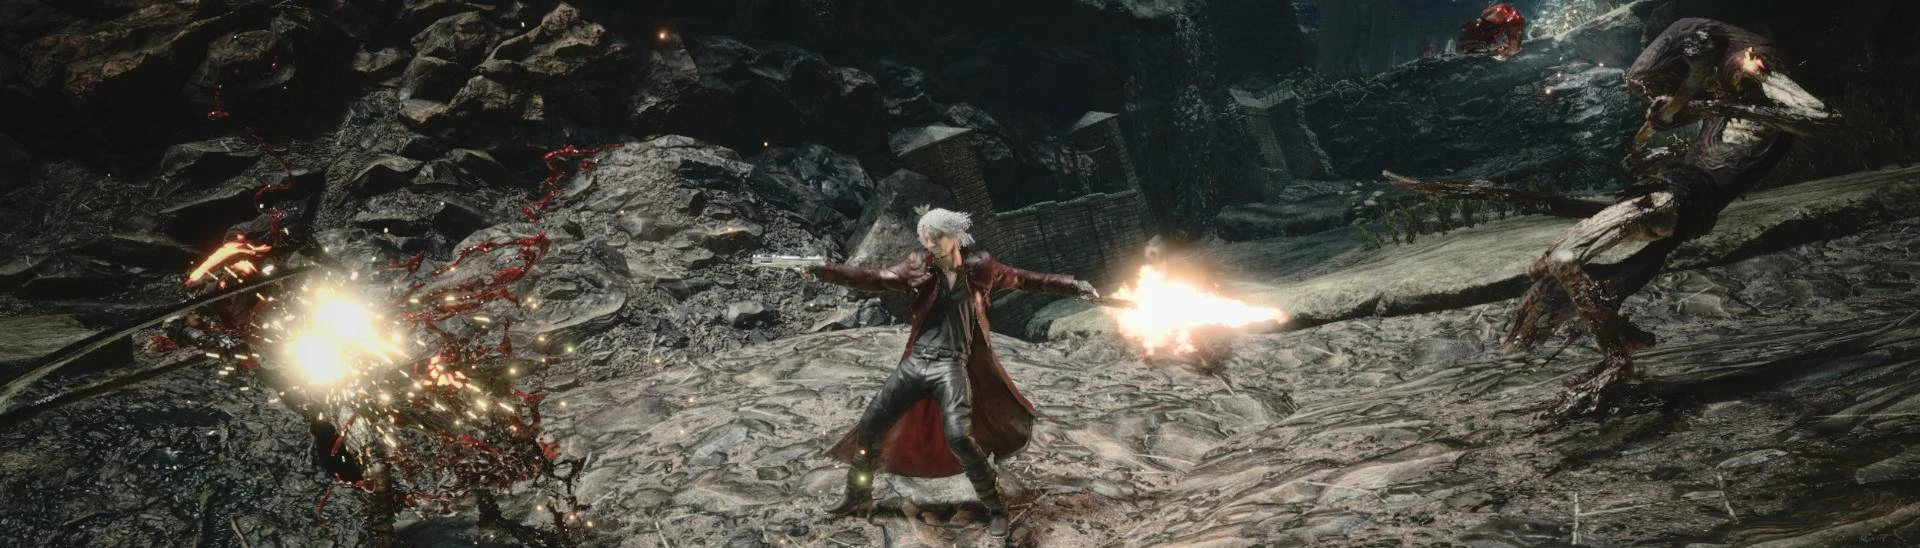 Dante takes on big, ugly enemies in latest Devil May Cry shots